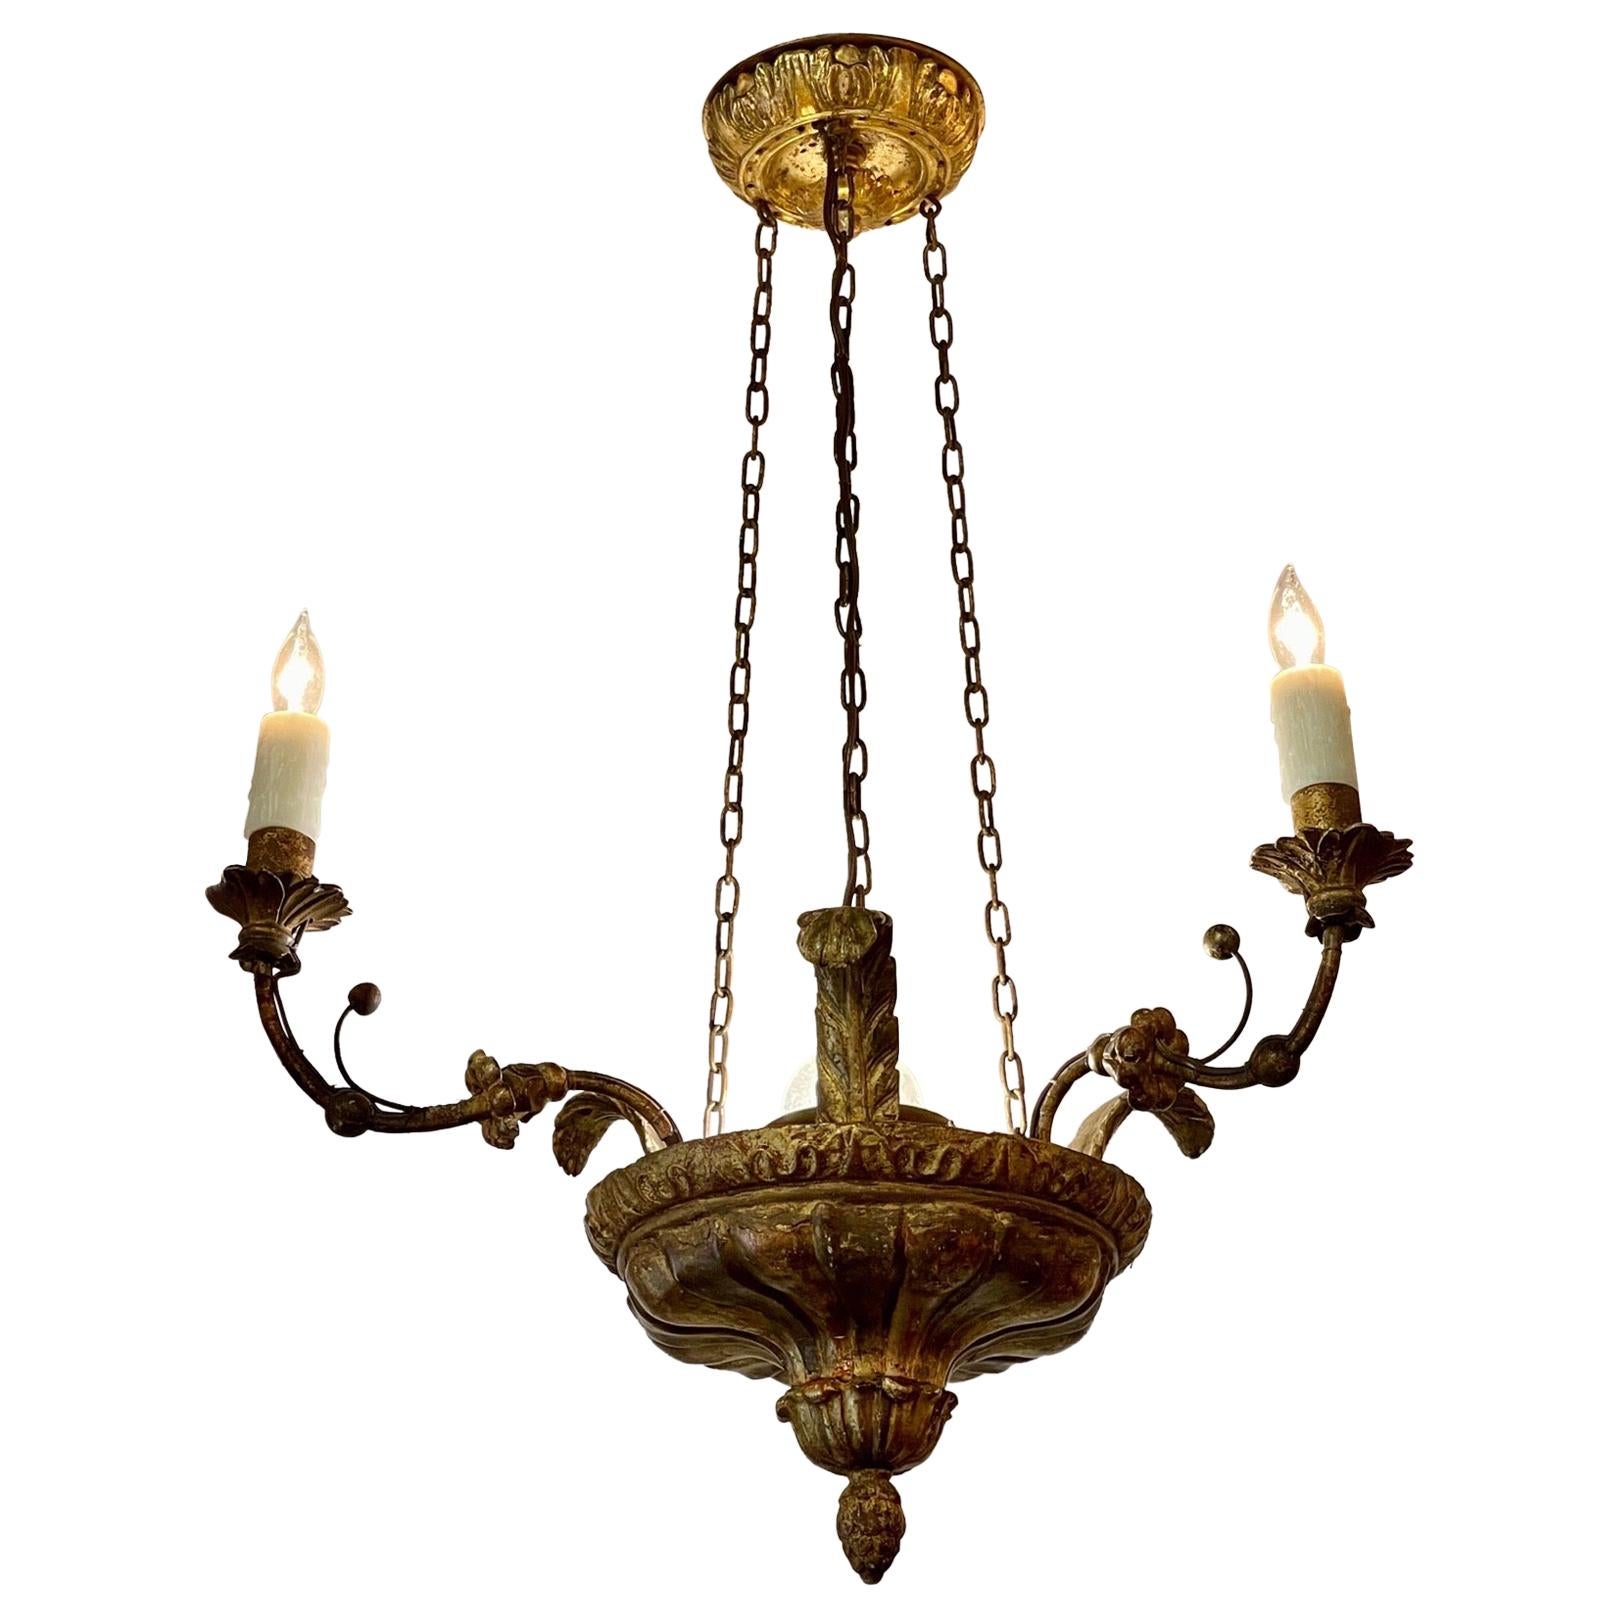 19th Century Italian Carved Giltwood and Iron Chandelier with 3 Lights